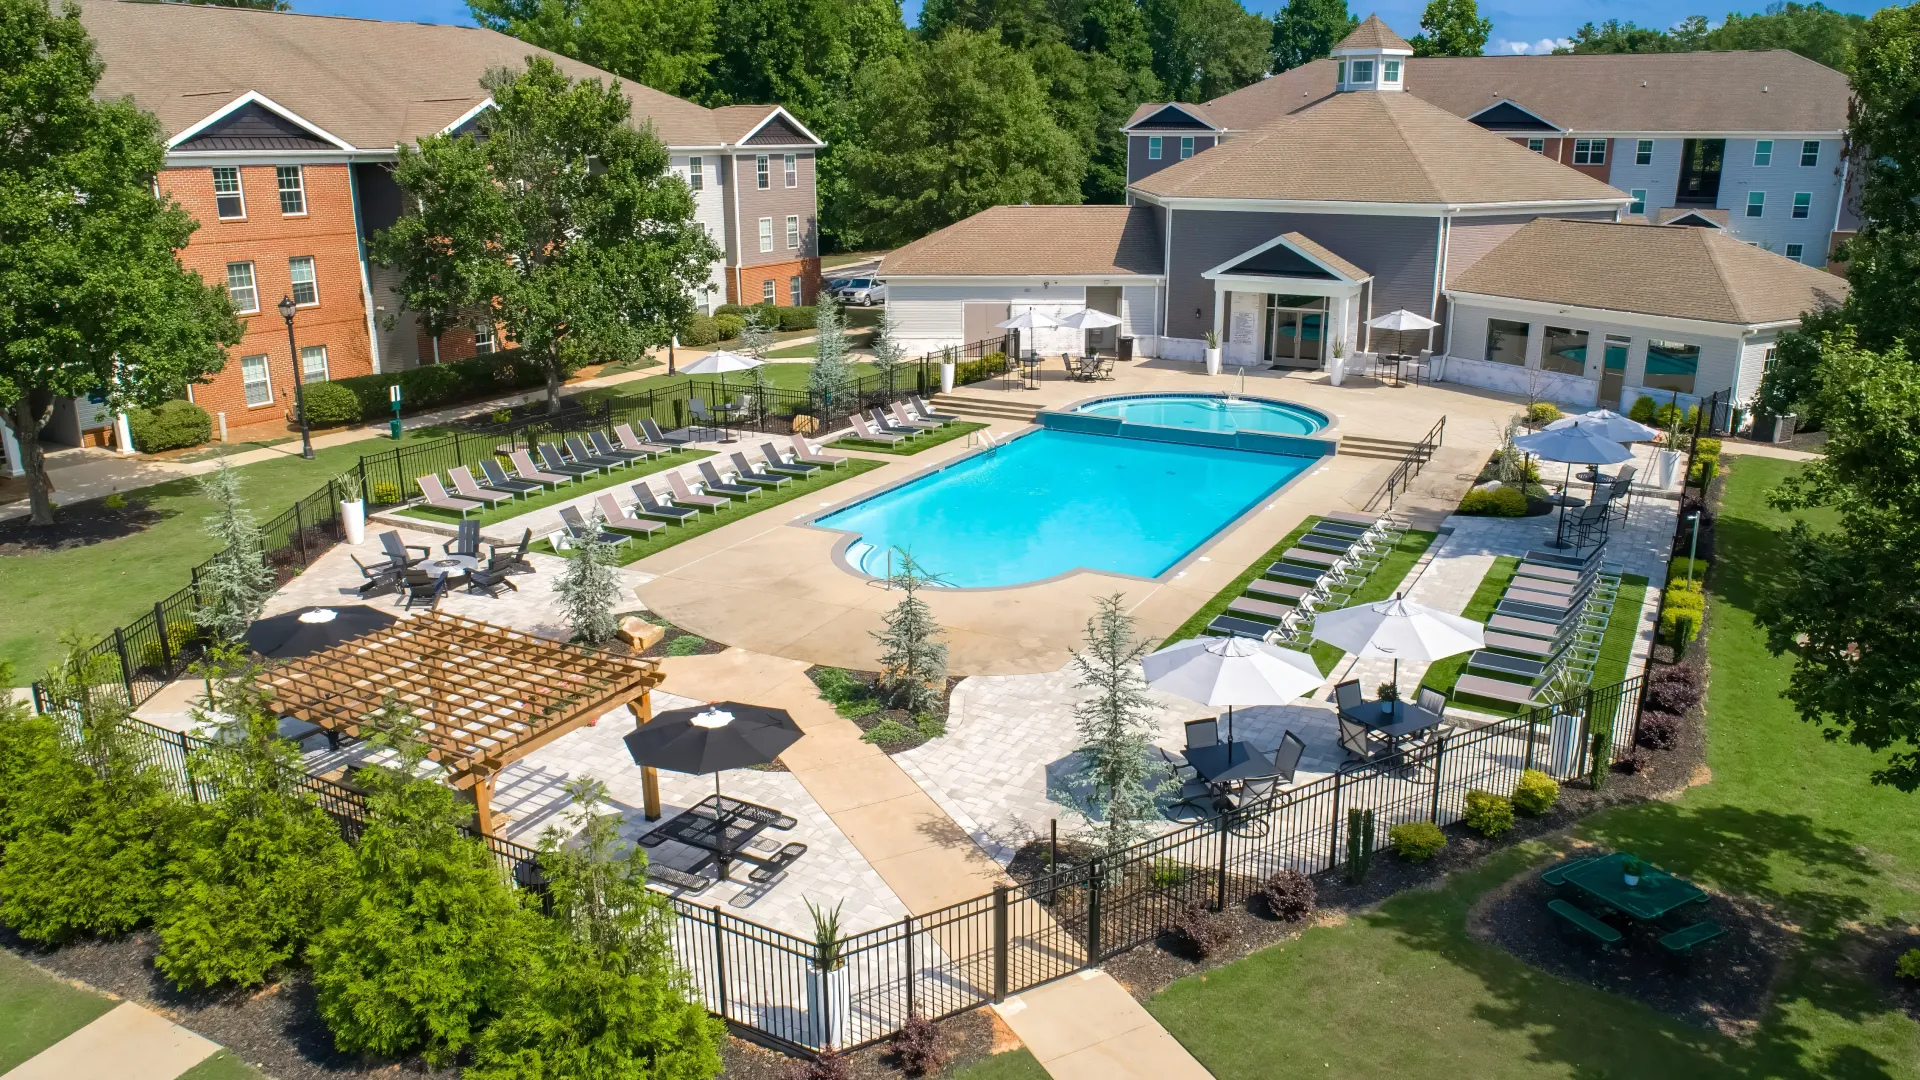 A bird’s eye view of the sprawling gated pool deck complete with elegant pavers 